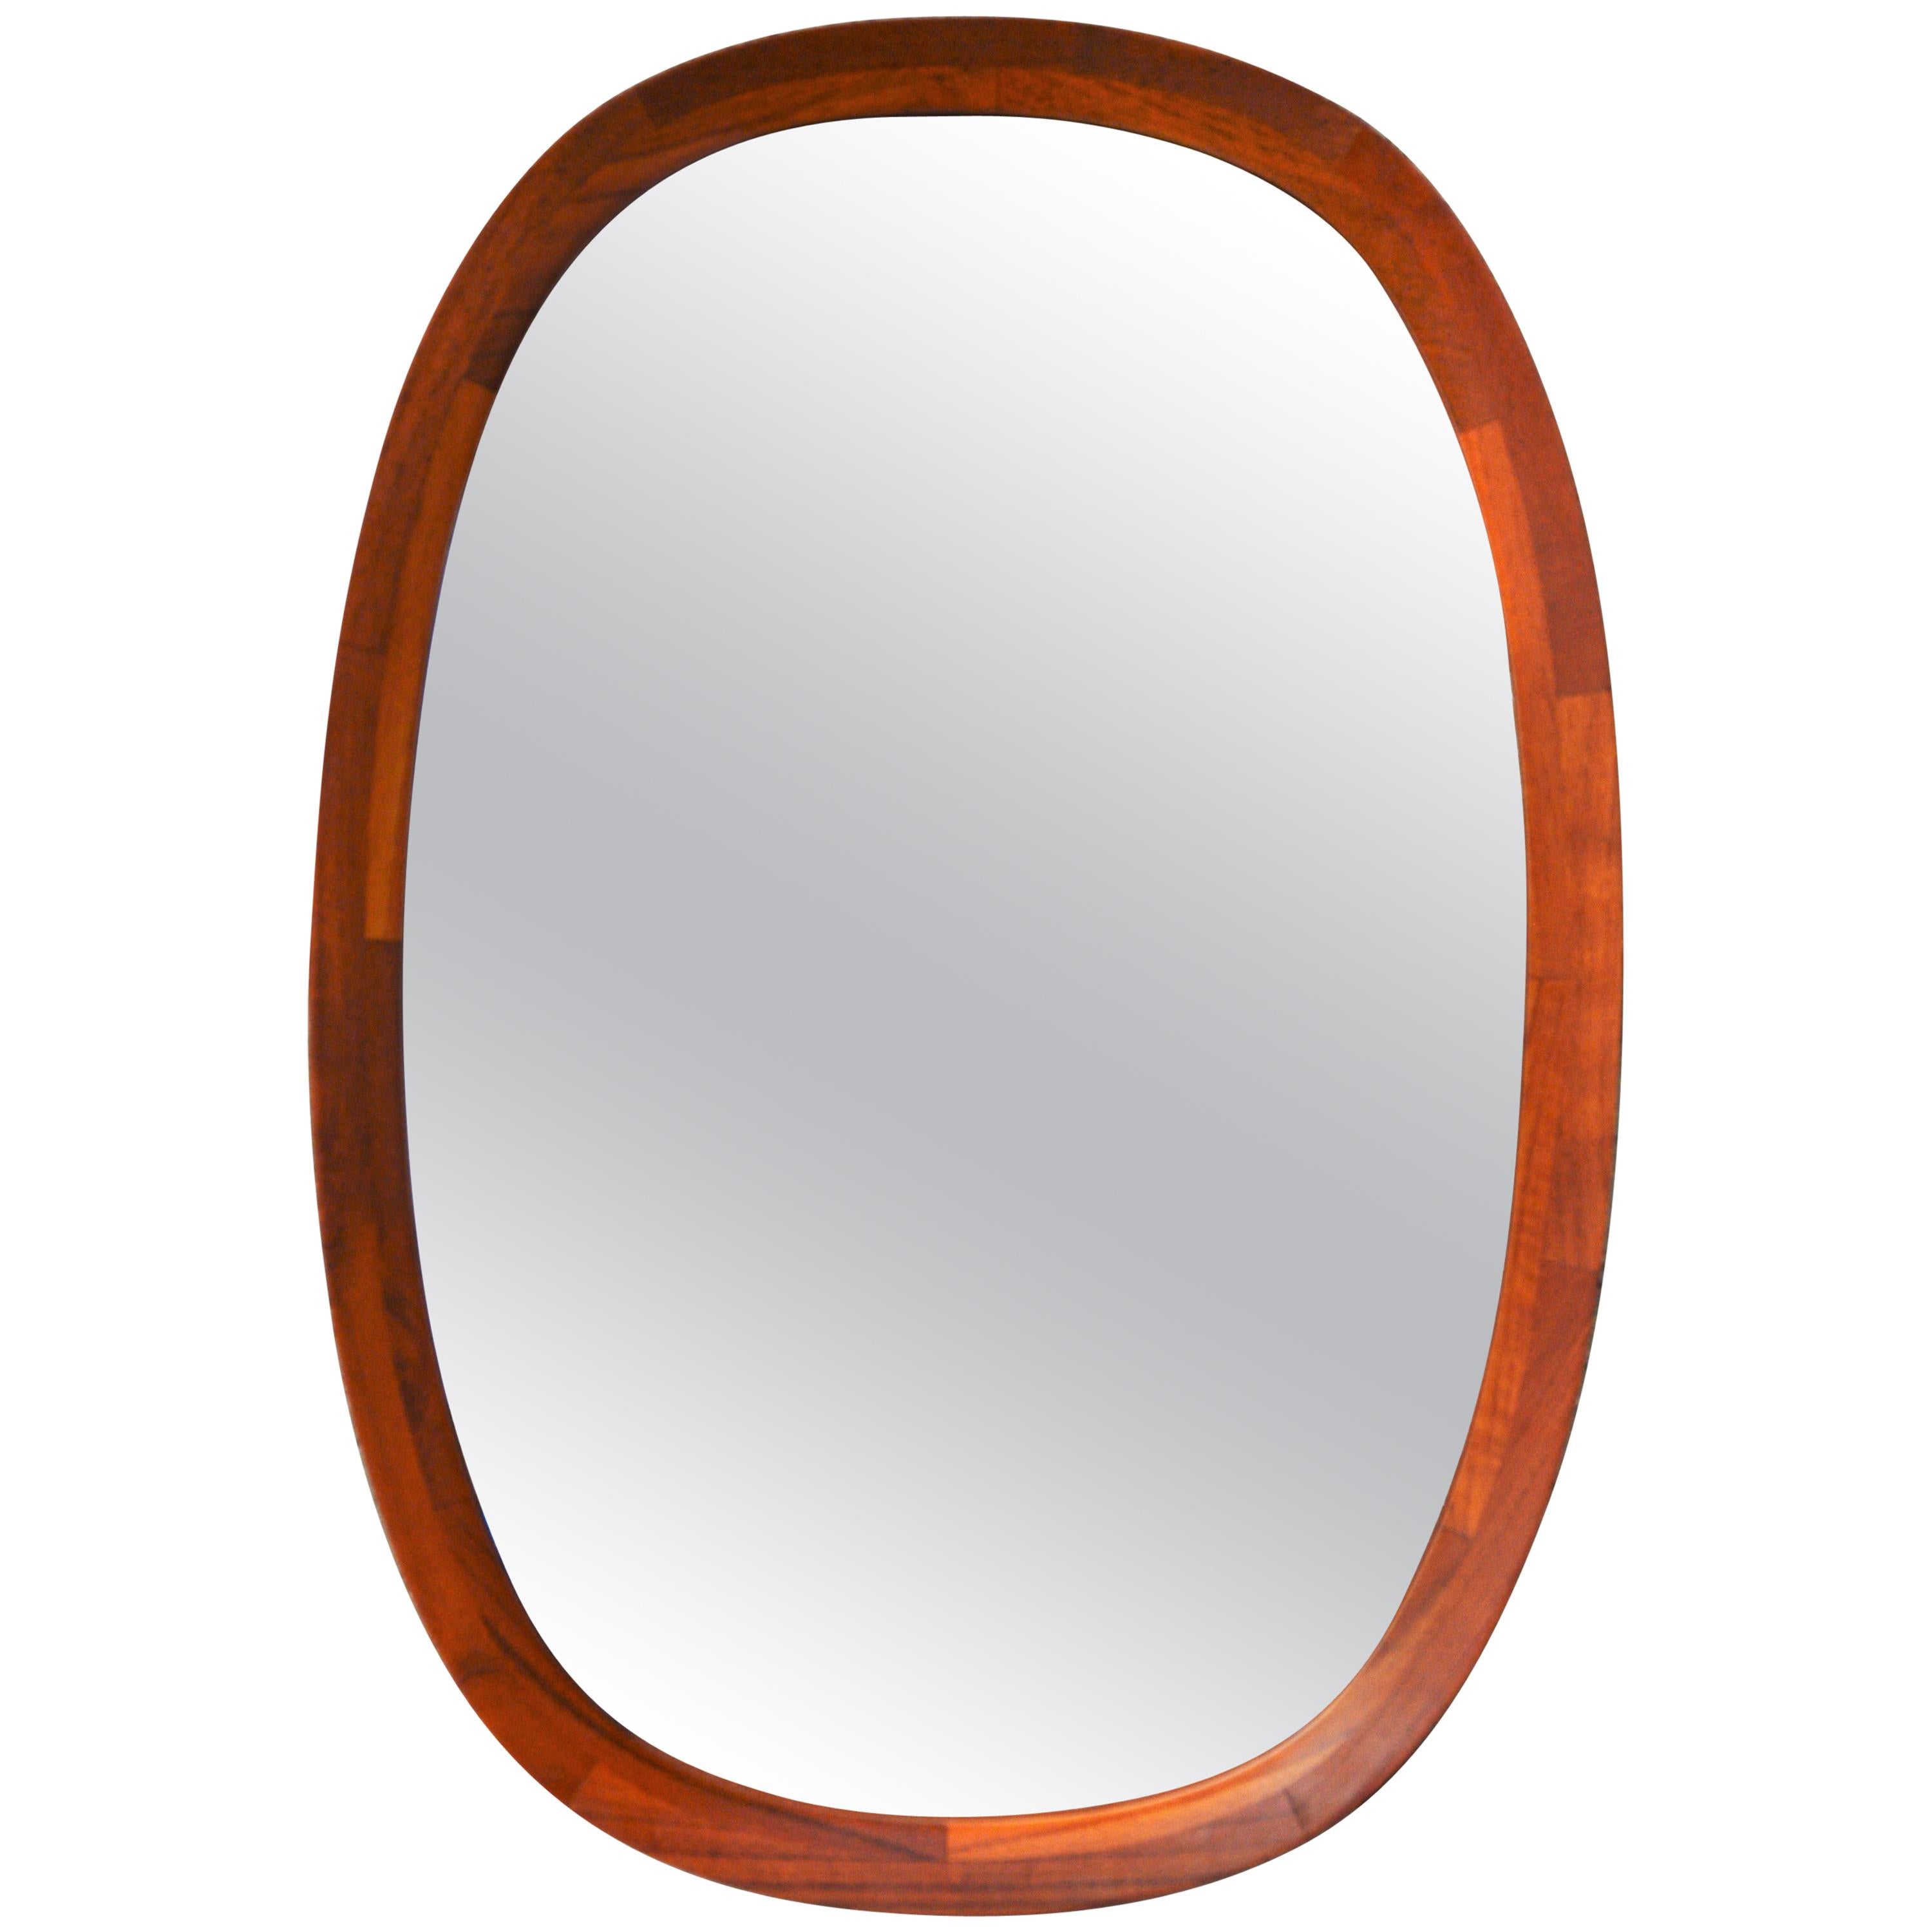 Large Danish Teak Oval or Ovoid Framed Mirror with Flared Edges by Sika Mobler